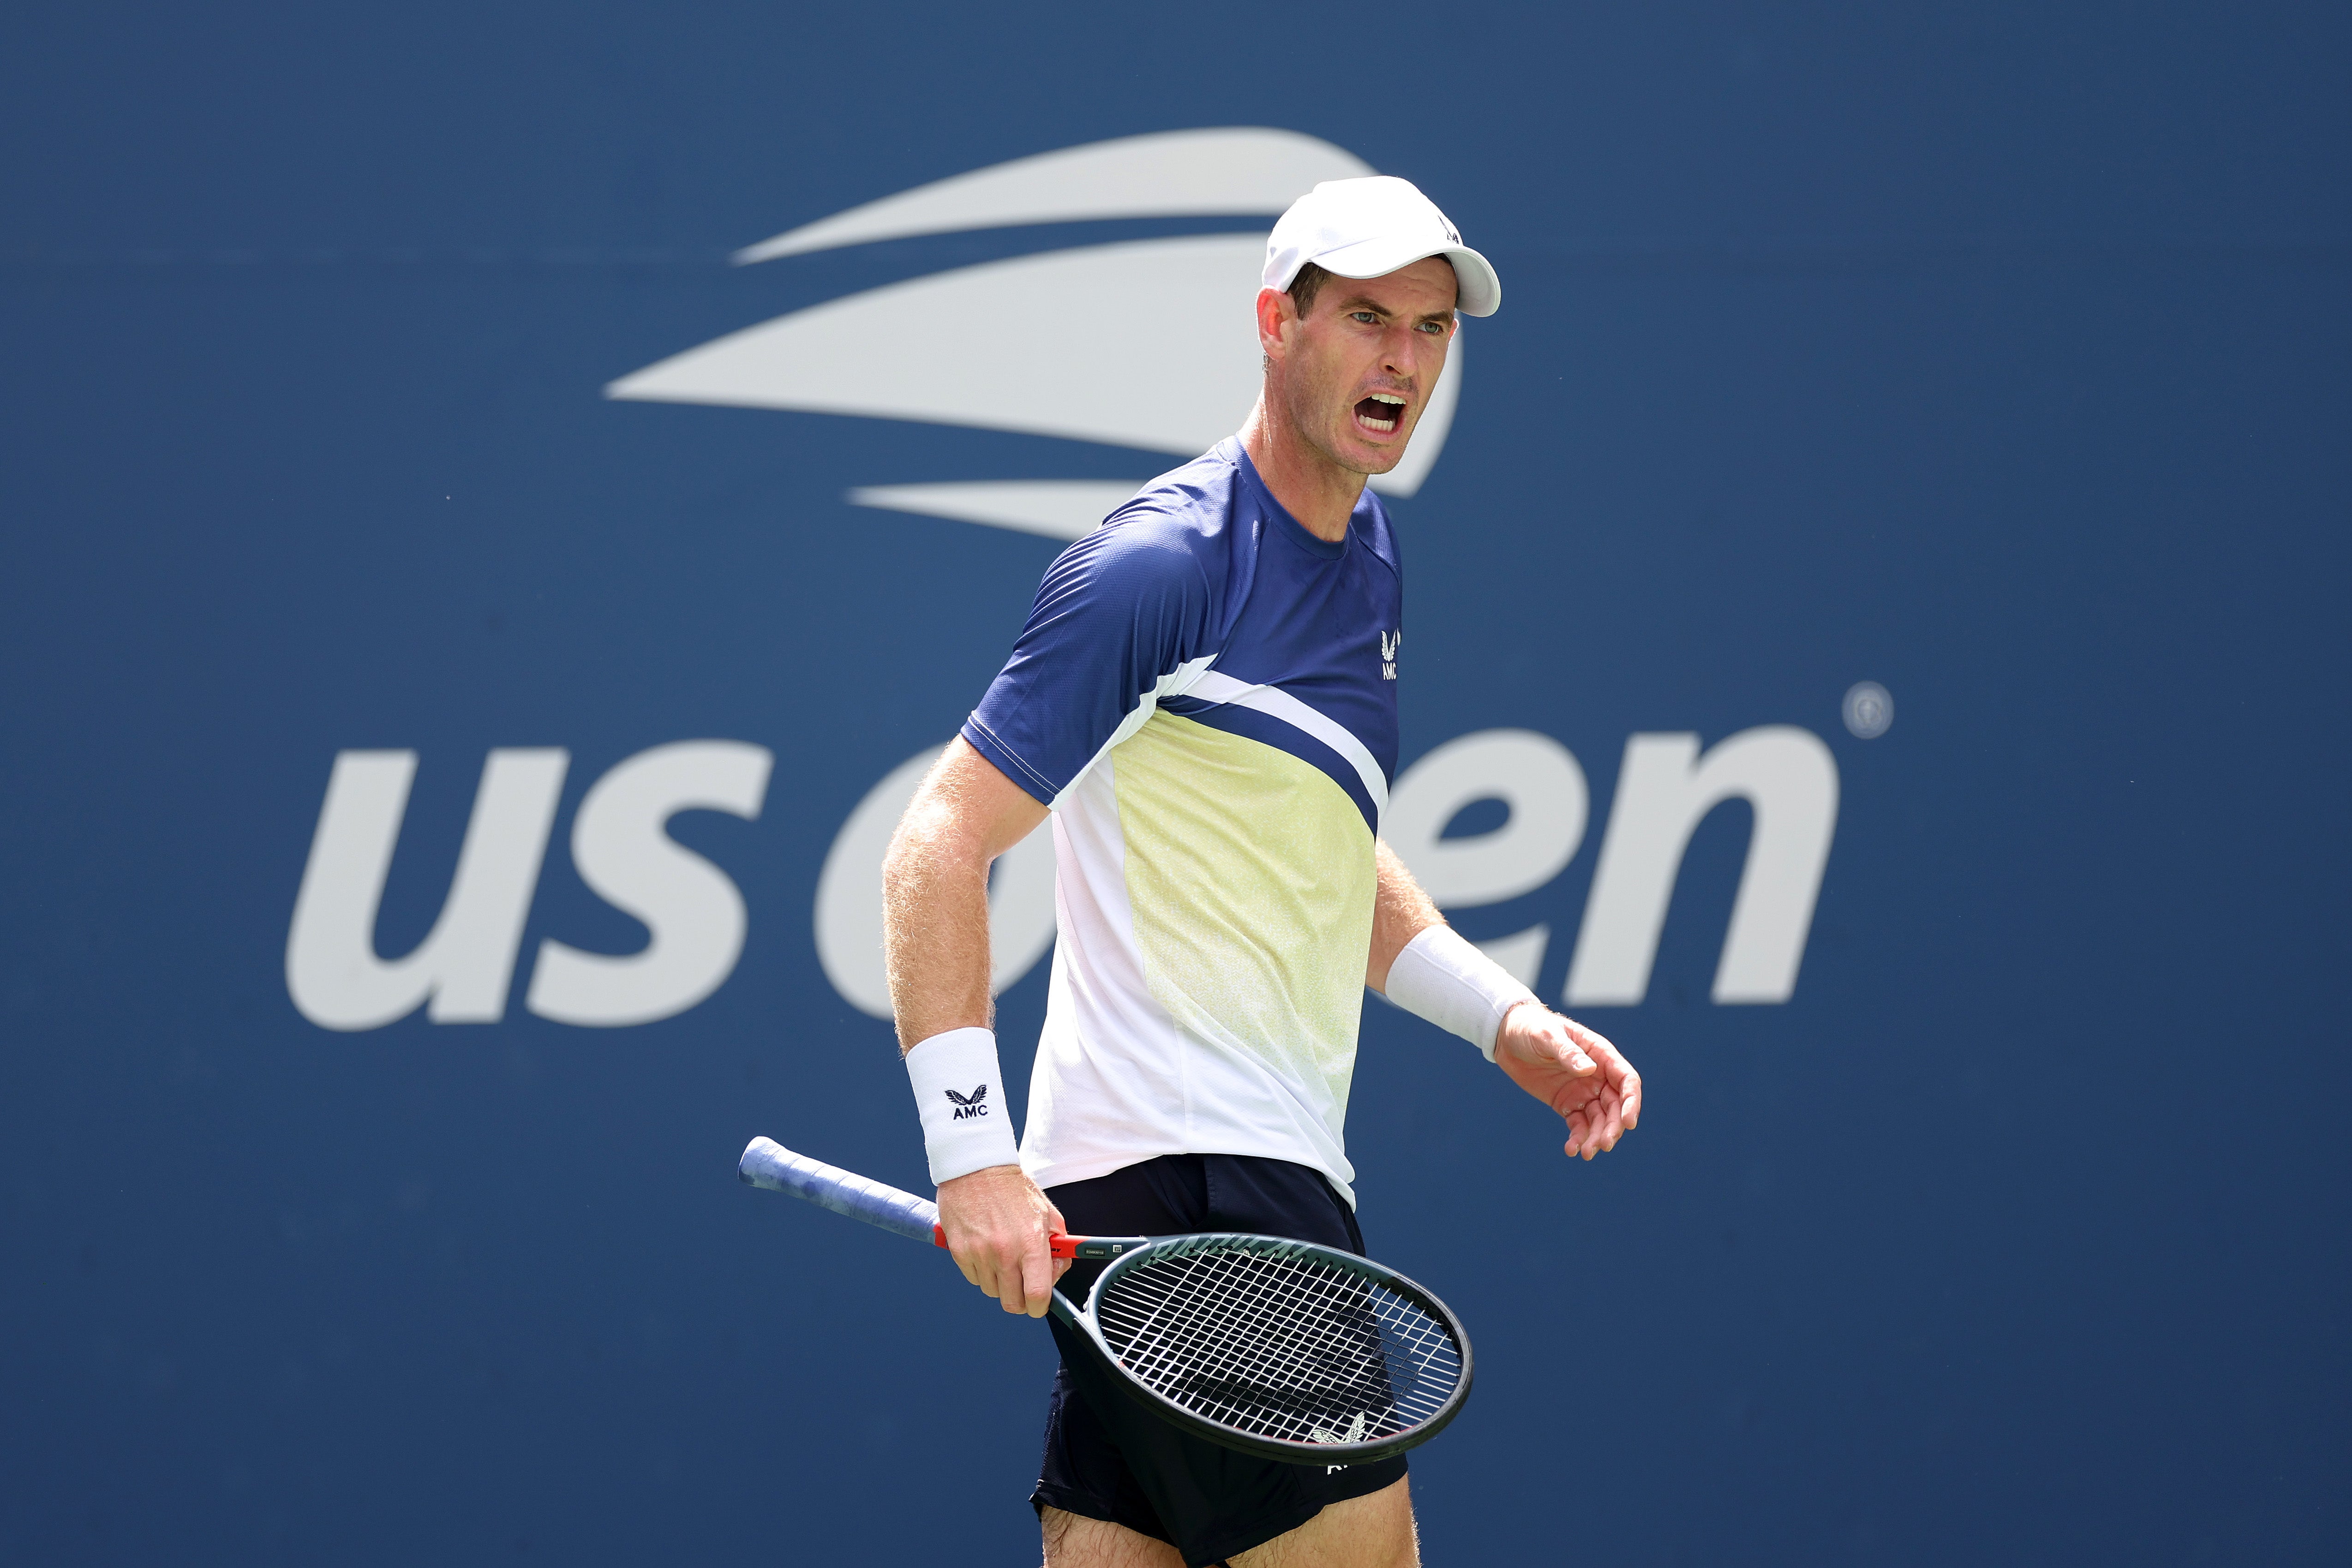 Andy Murray in action during the first round of the US Open